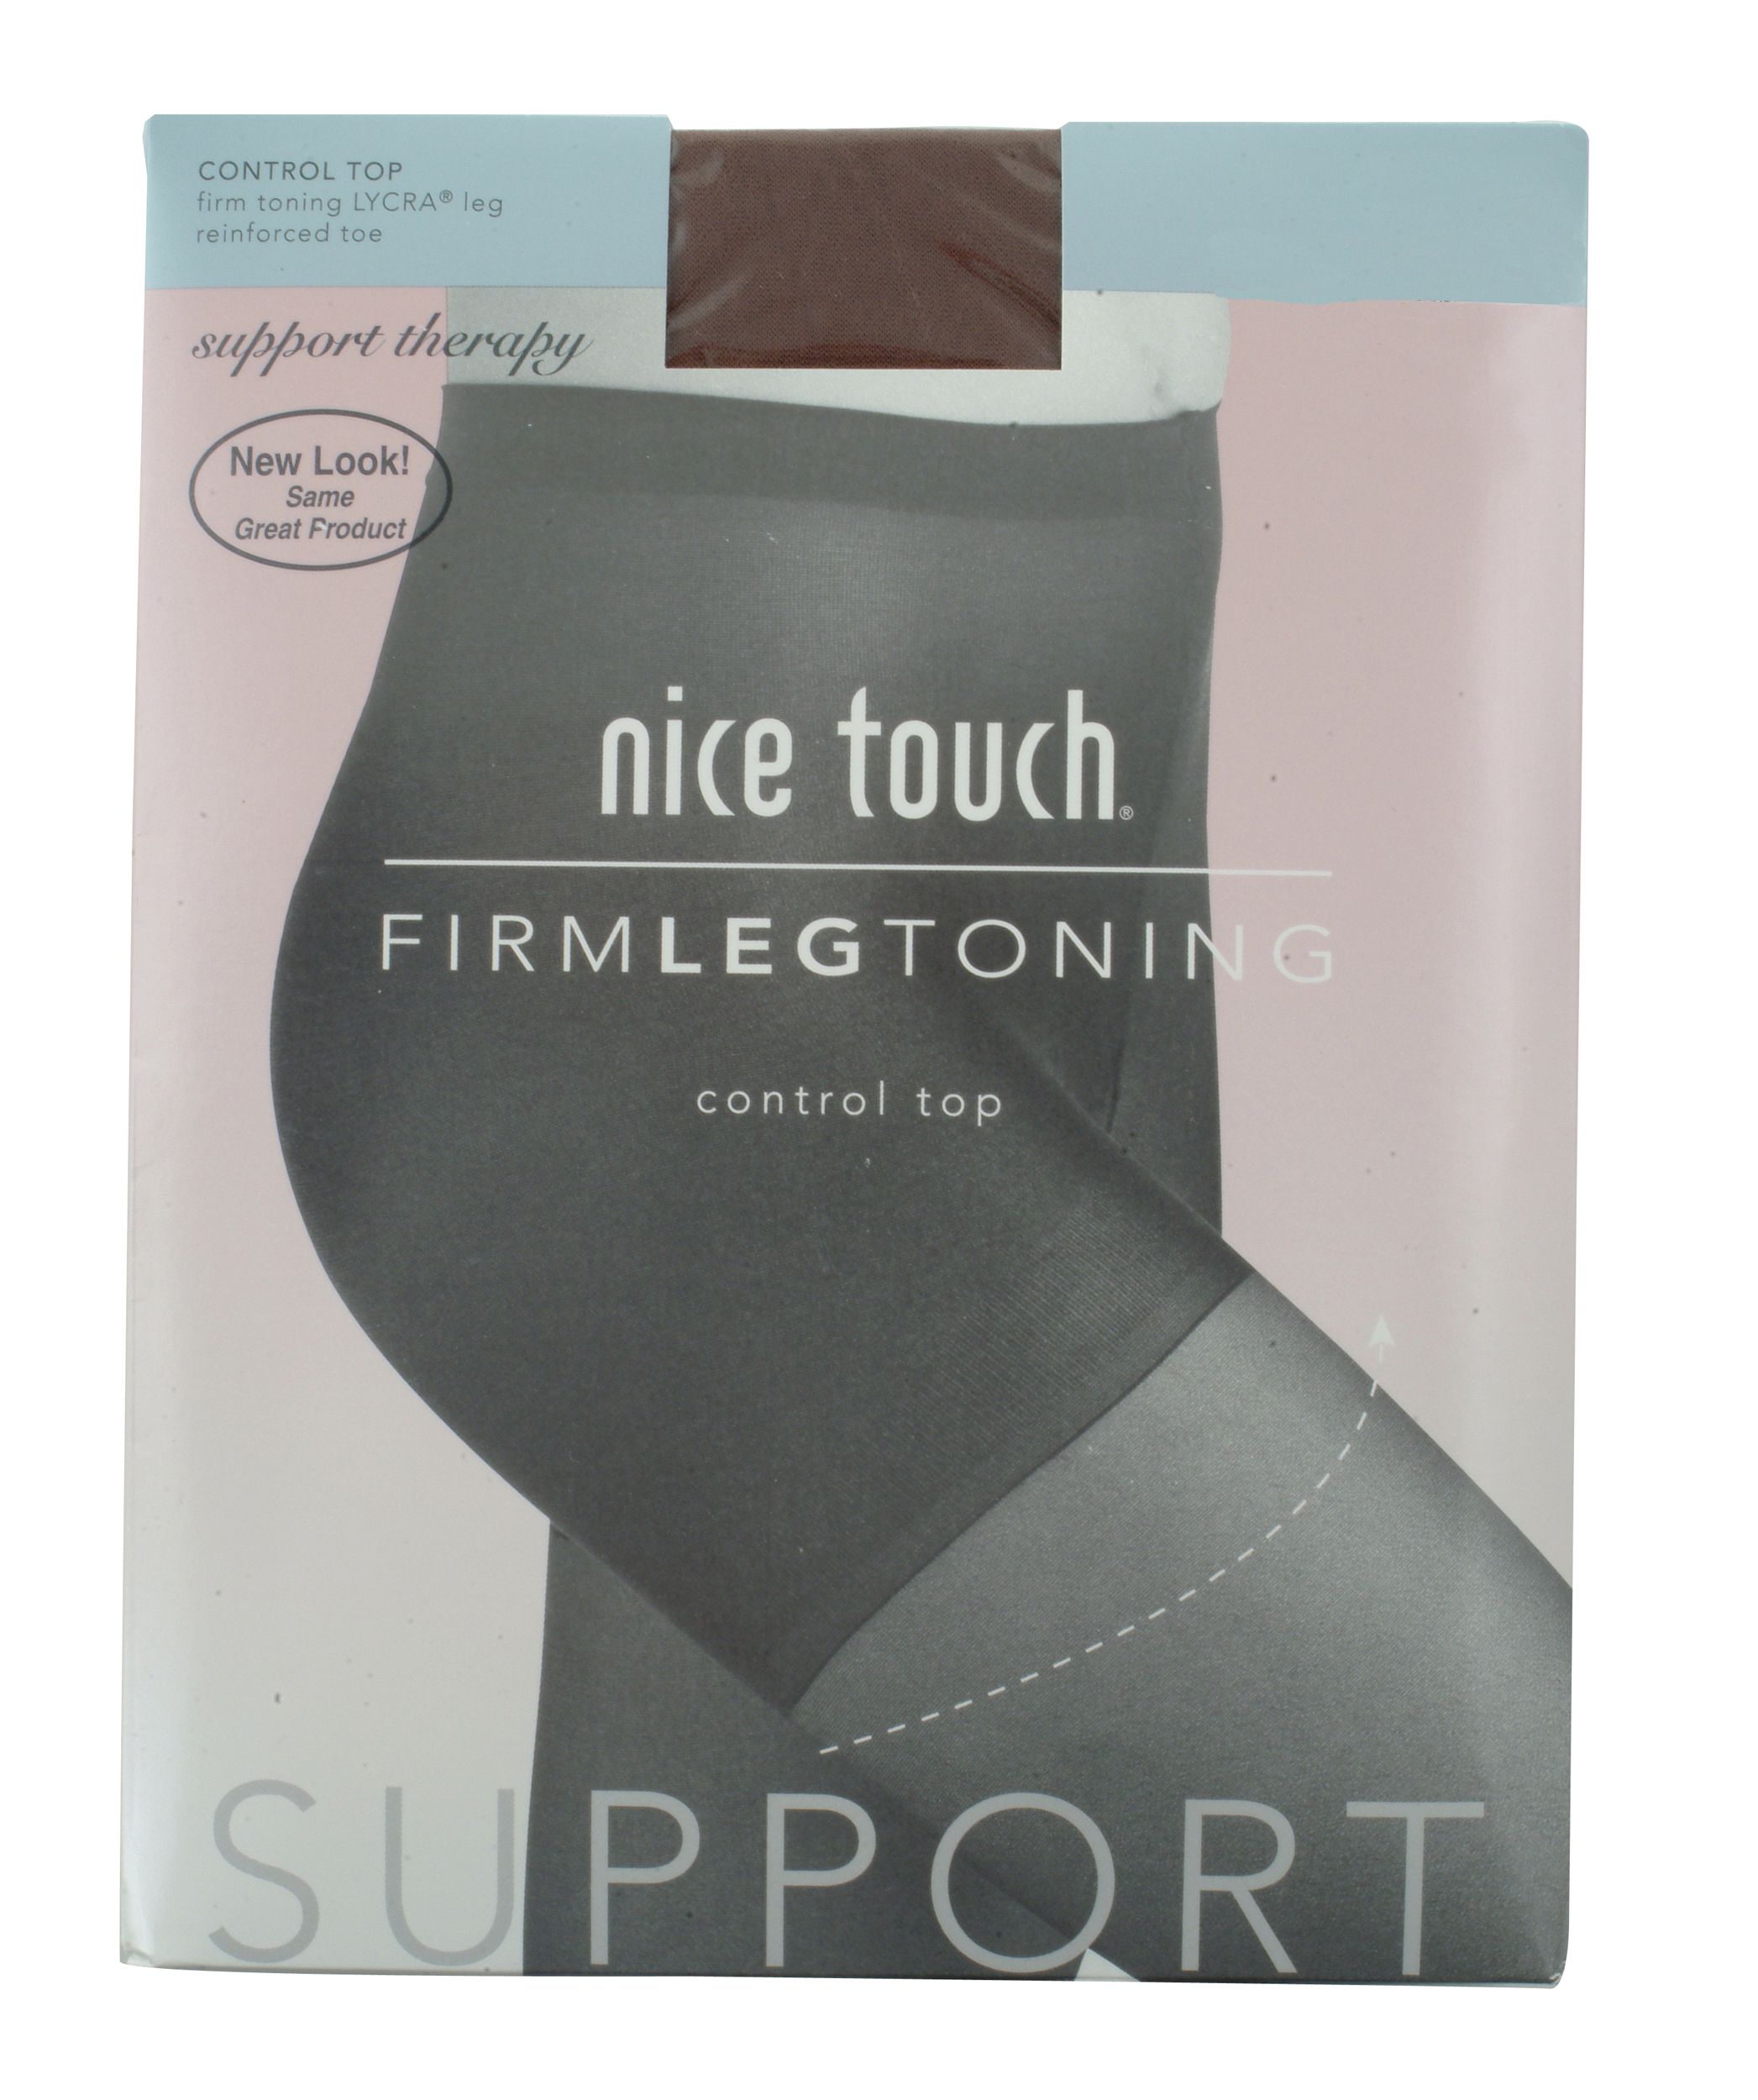 Nice Touch Pantyhose Support Therapy Firm Toning